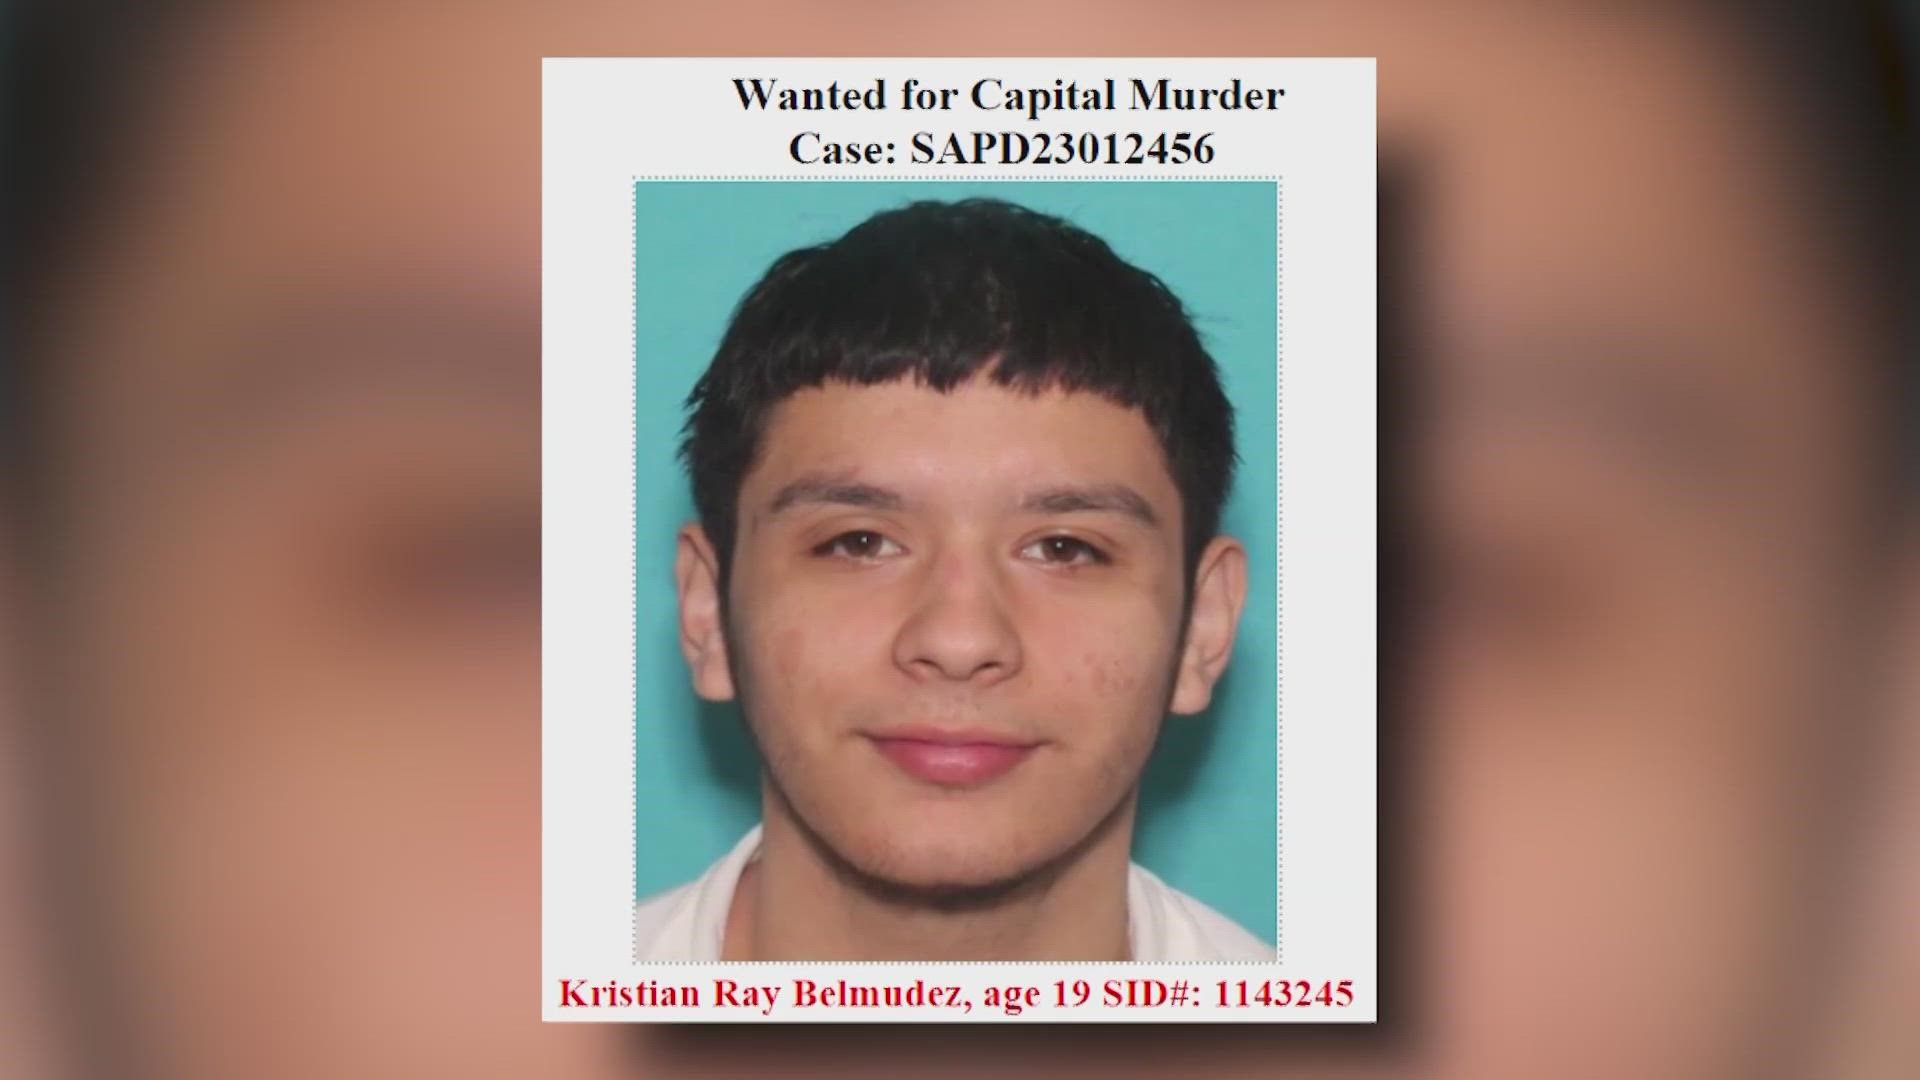 Officials with the San Antonio Police Department now say they're looking for Kristian Ray Belmudez, who they believe killed the victims and is armed and dangerous.